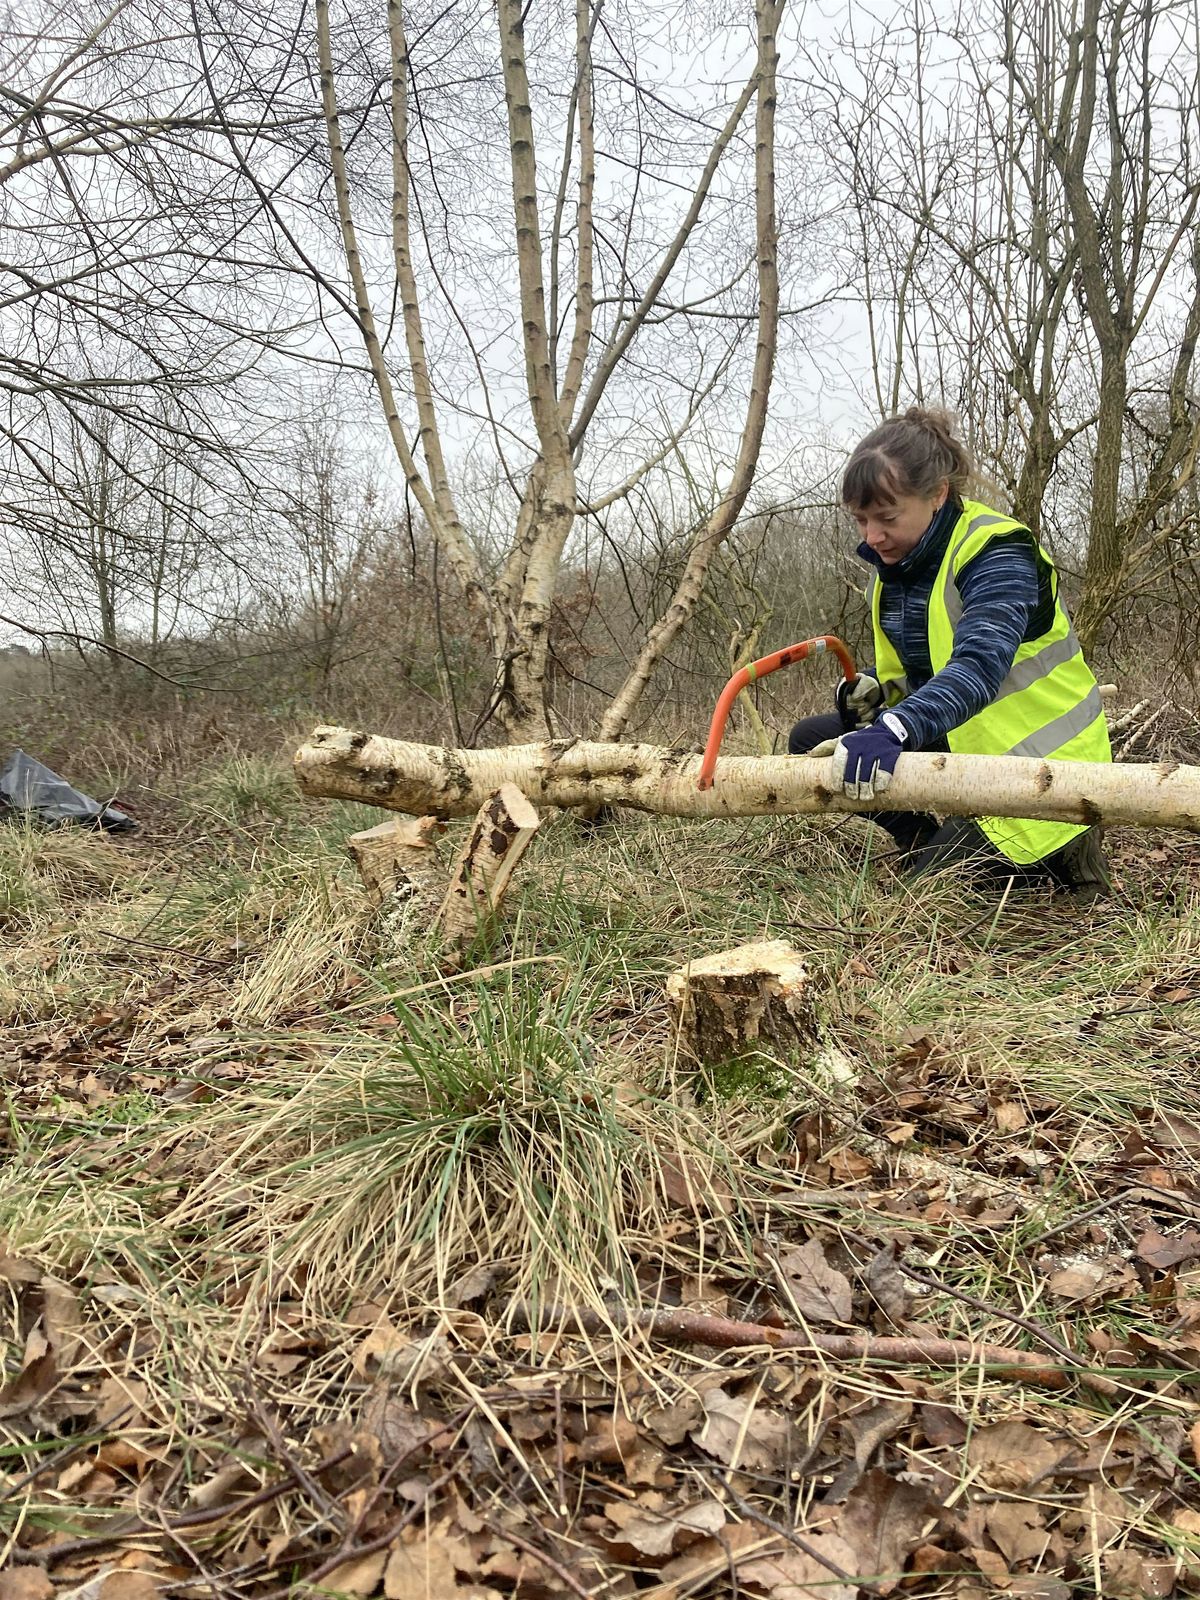 Volunteer day: hands-on conservation in Epping Forest (Women* only)